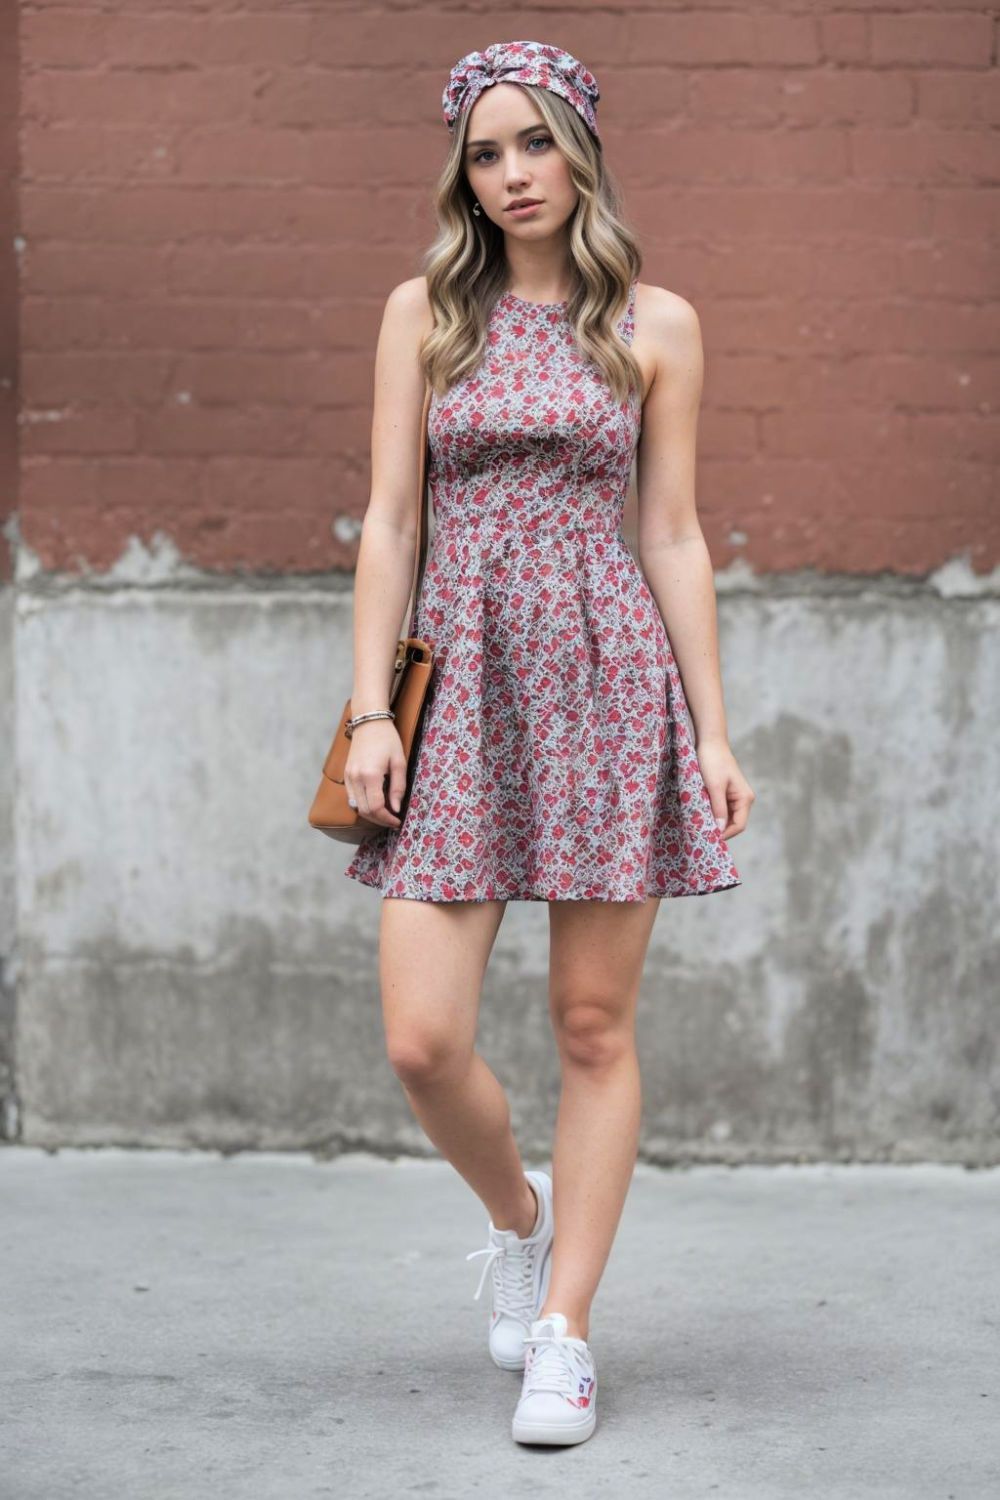 classic graphic bandana dress and sneakers